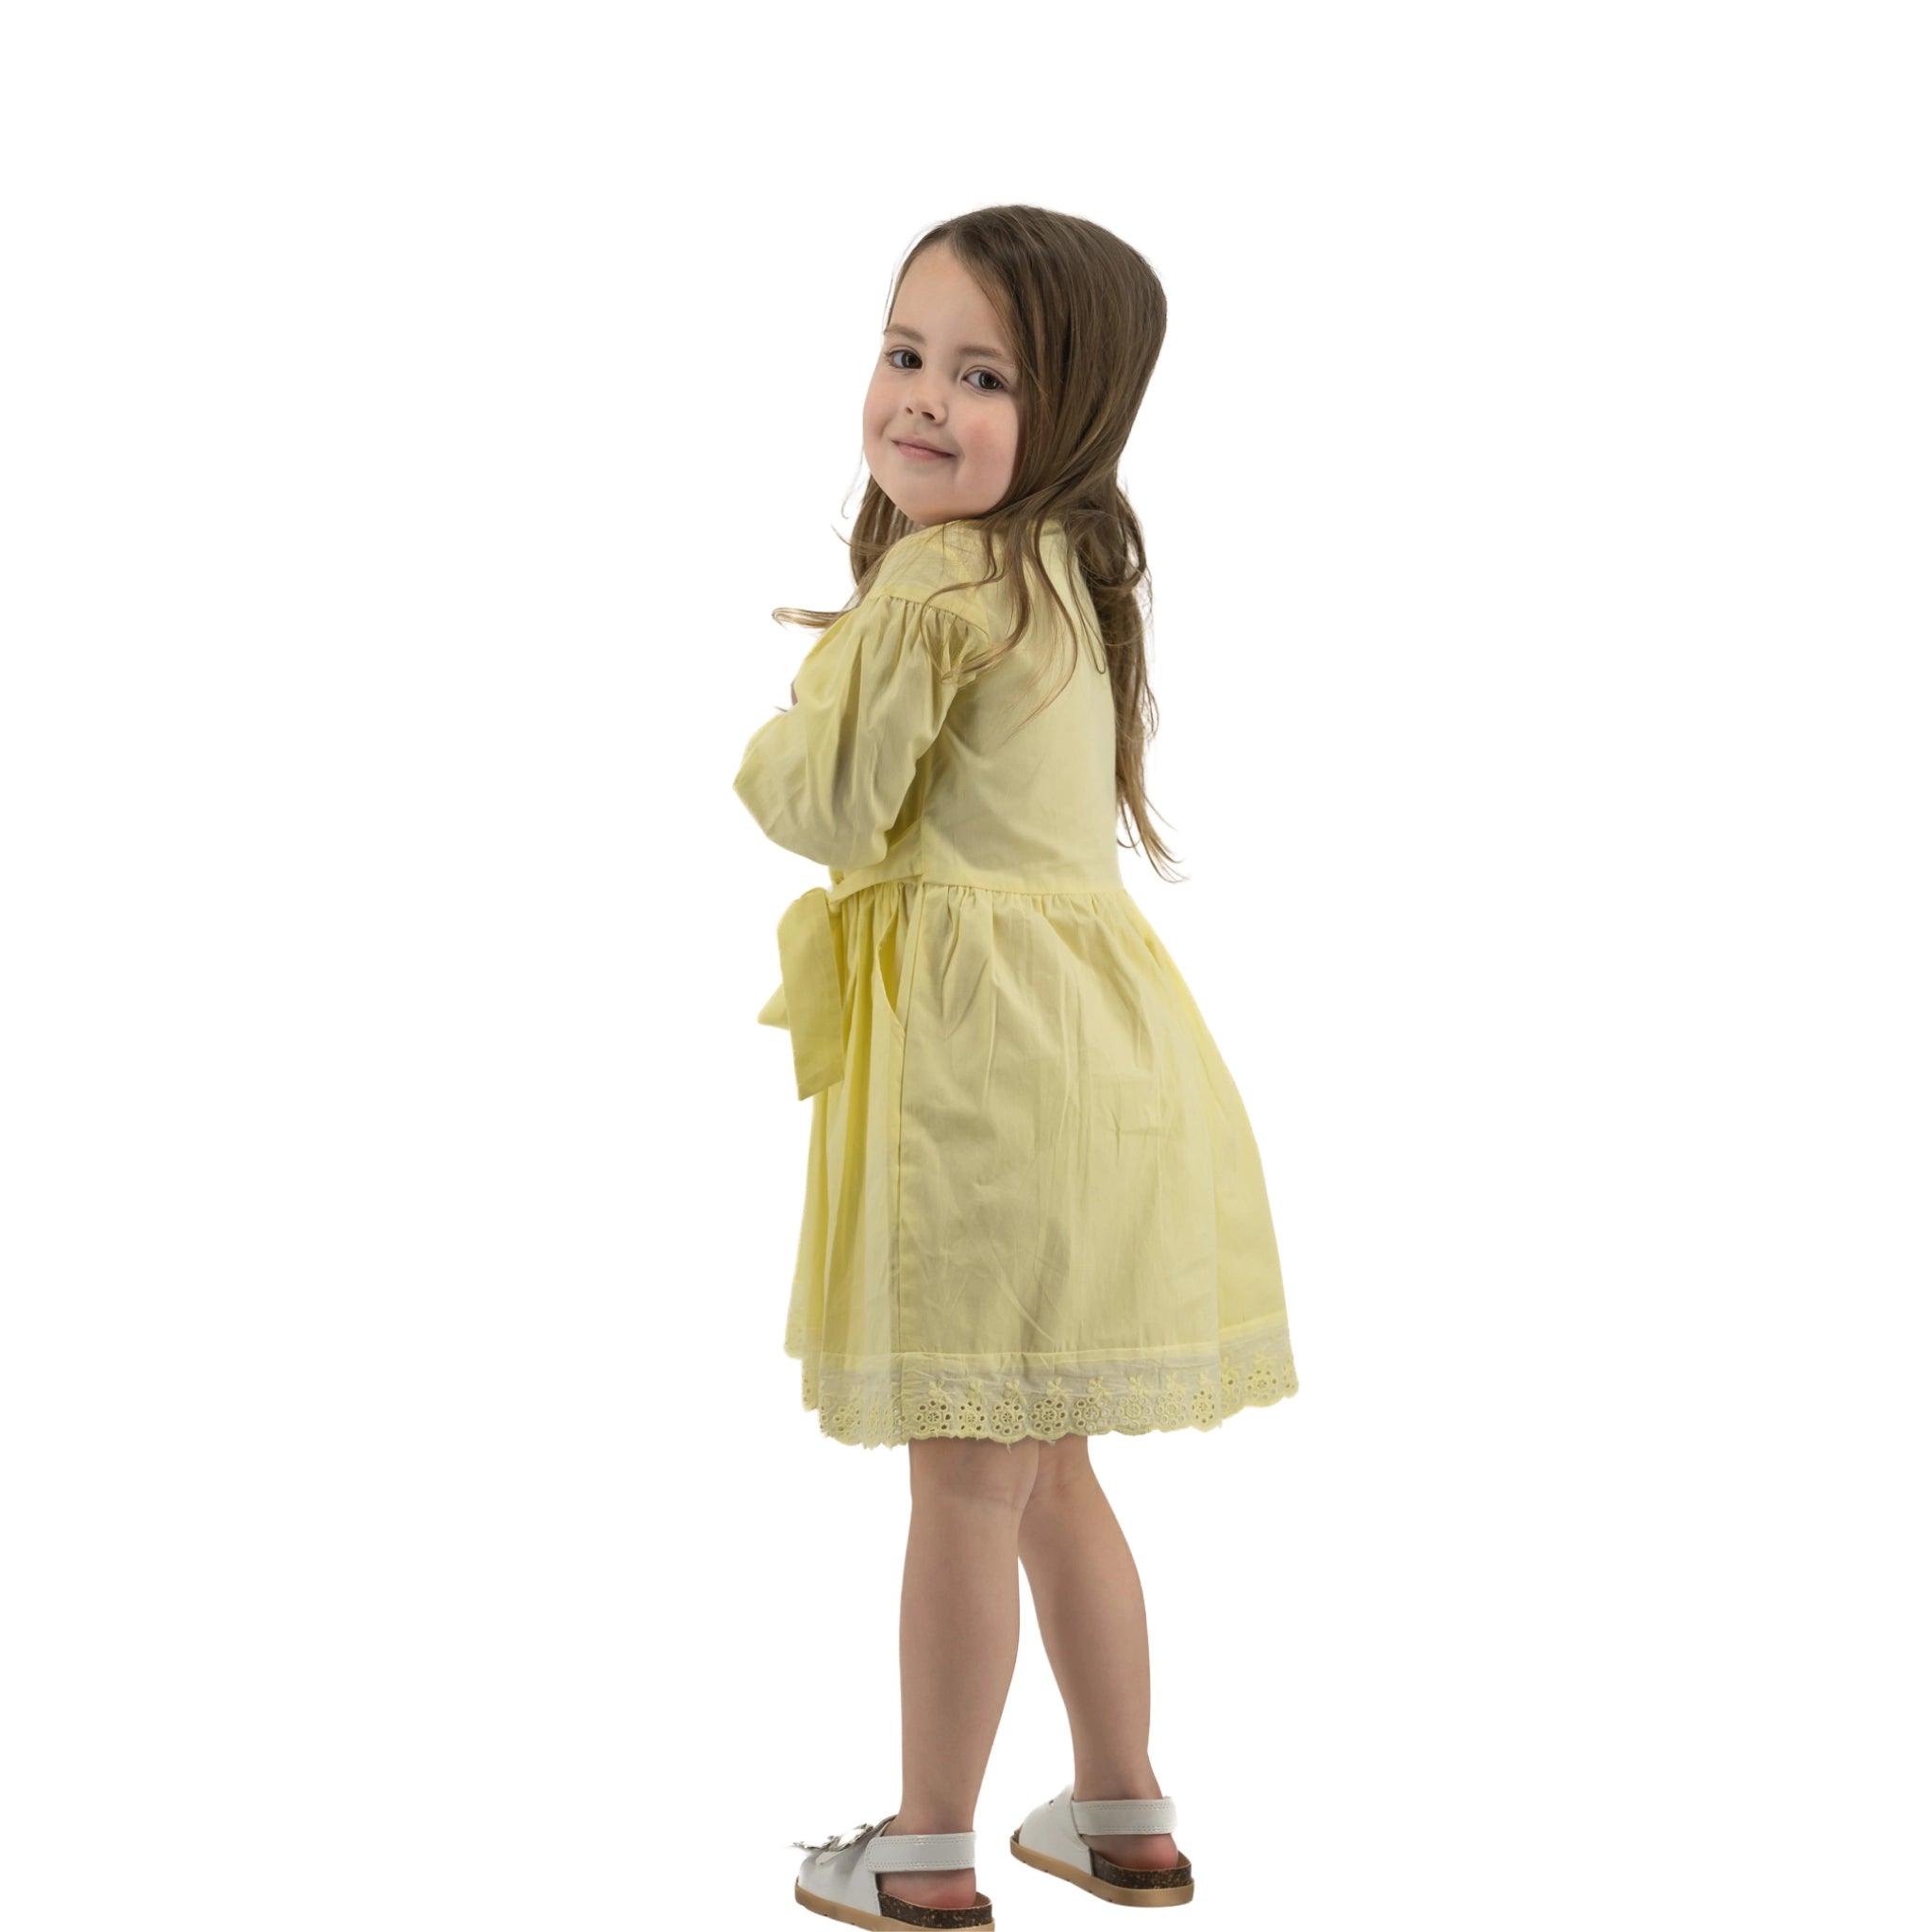 Young girl in a Karee yellow long puff sleeve cotton dress smiling over her shoulder, standing against a white background.